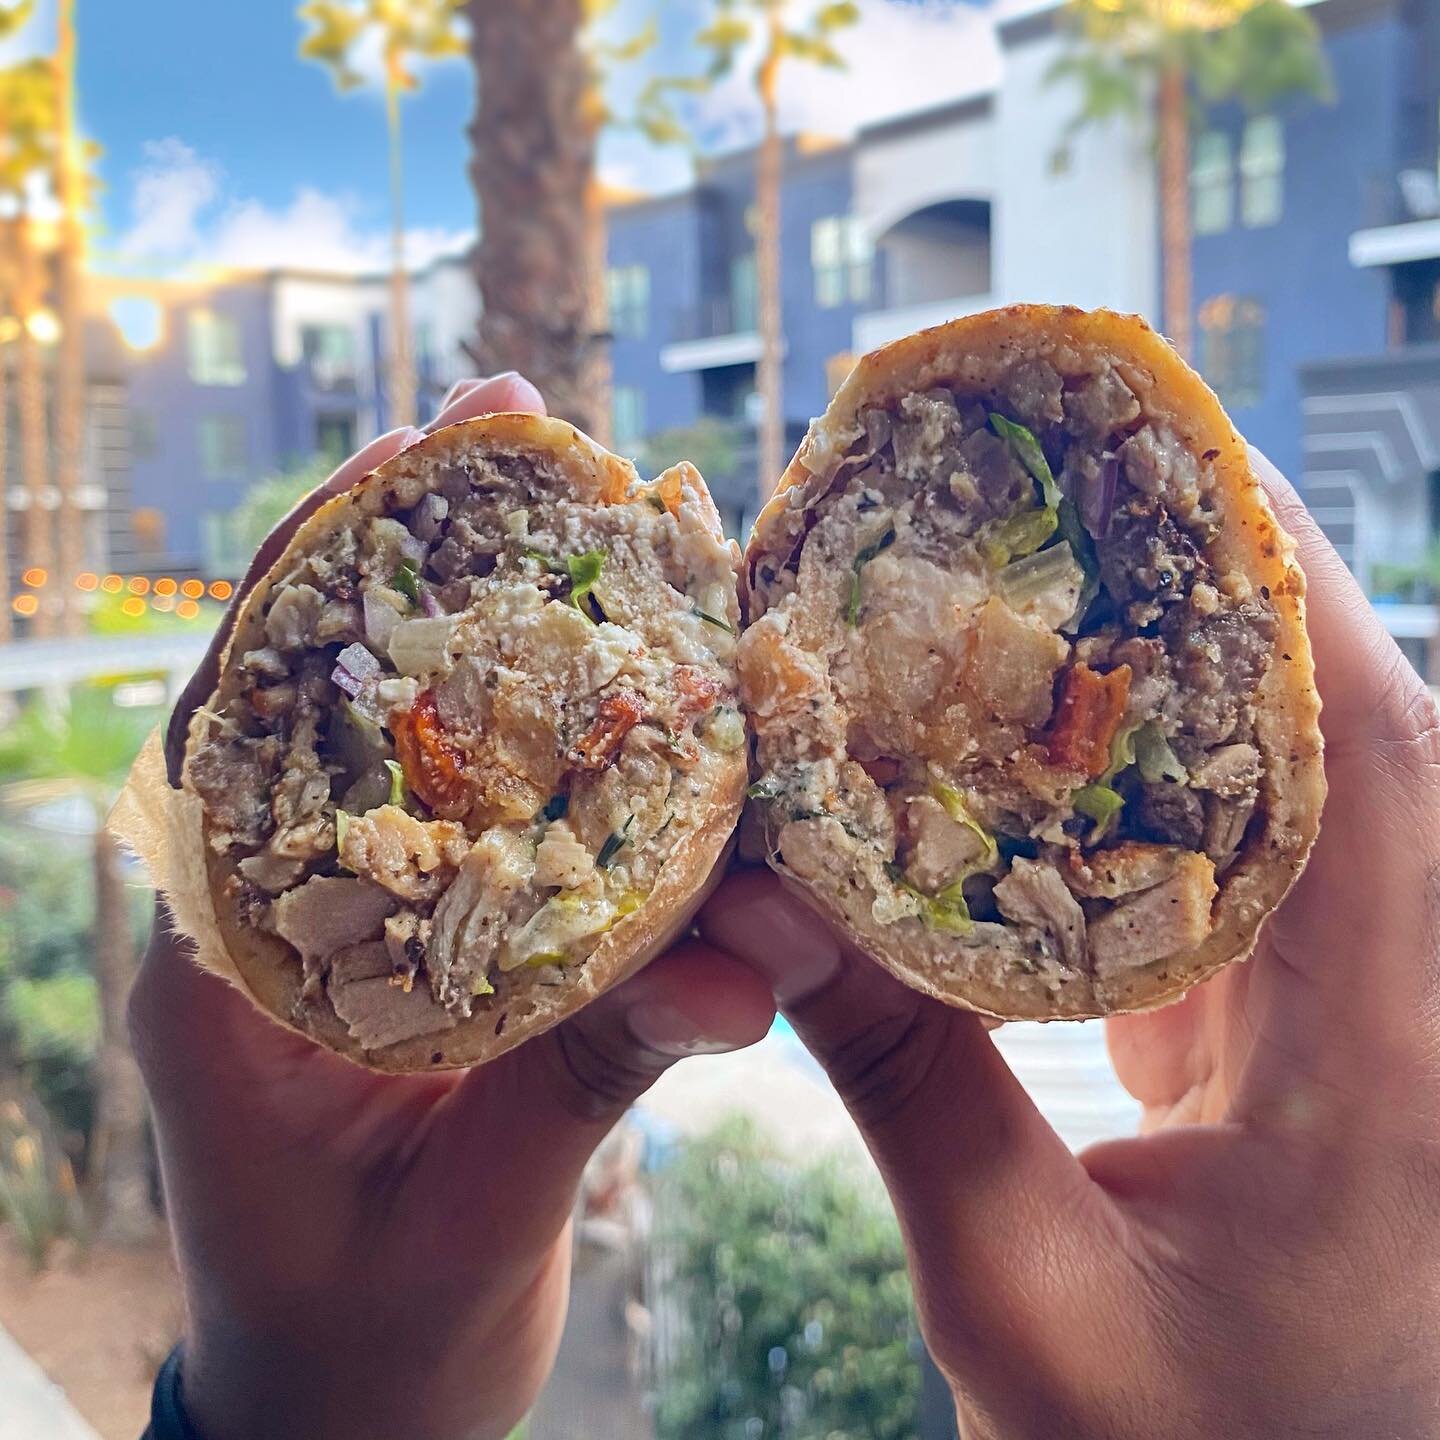 This is a special shout out to one of our favorite places in North Hollywood @rodinipark 
.
.
We are never disappointed!
Featured is the Big Fat Pita. Make sure you add fries 😉😉😉
.
.
.
#noho #losangeles #rodinipark #pita #gyro #mediterraneanfood #